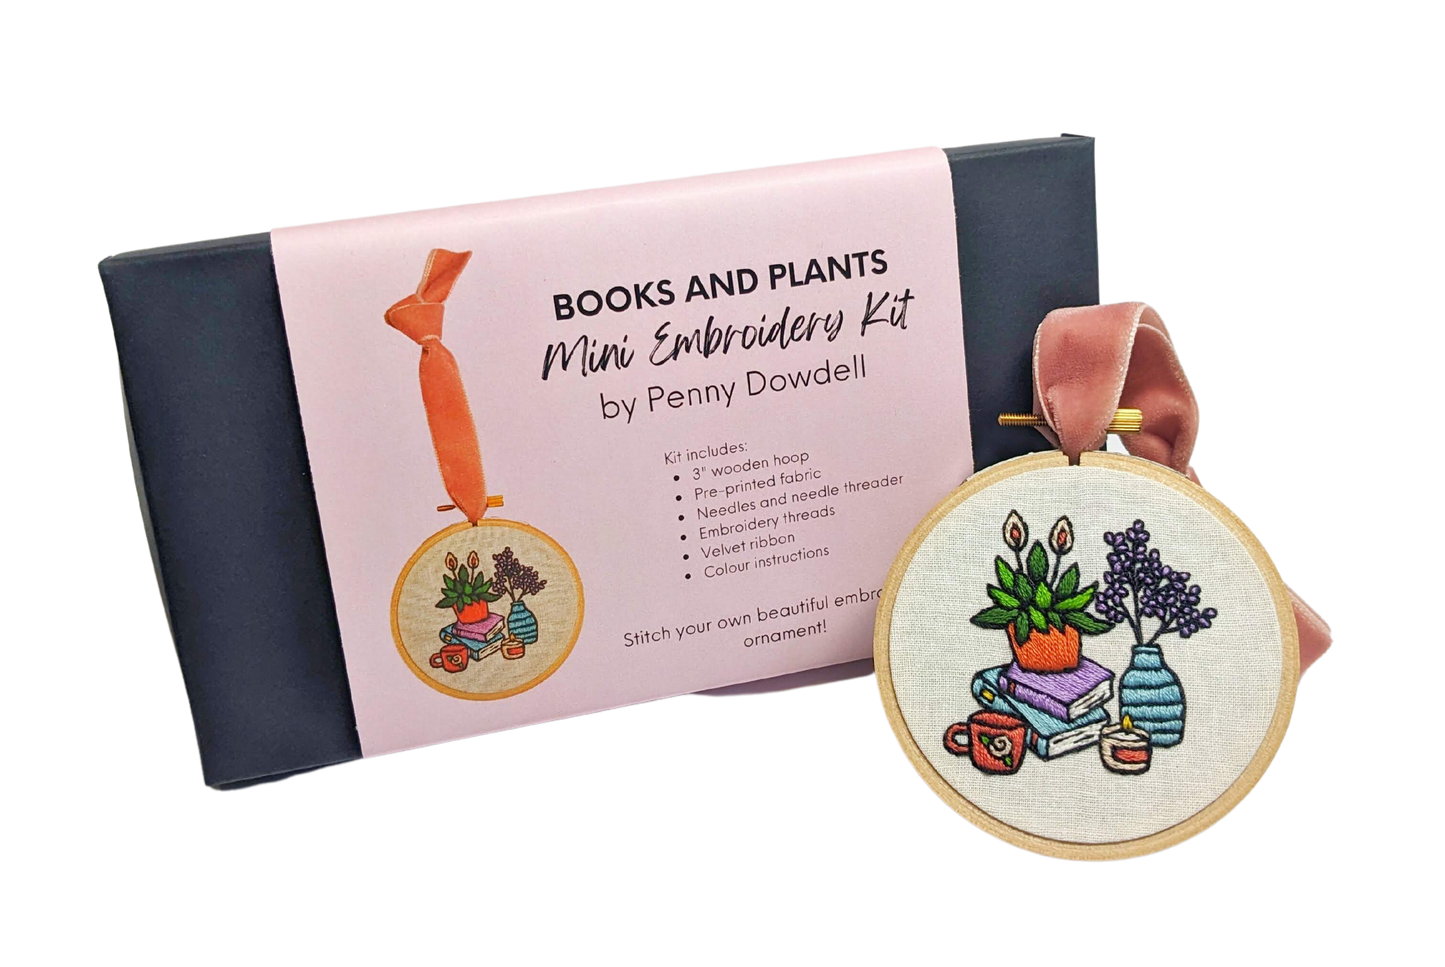 Books and plants Mini Embroidery Kit